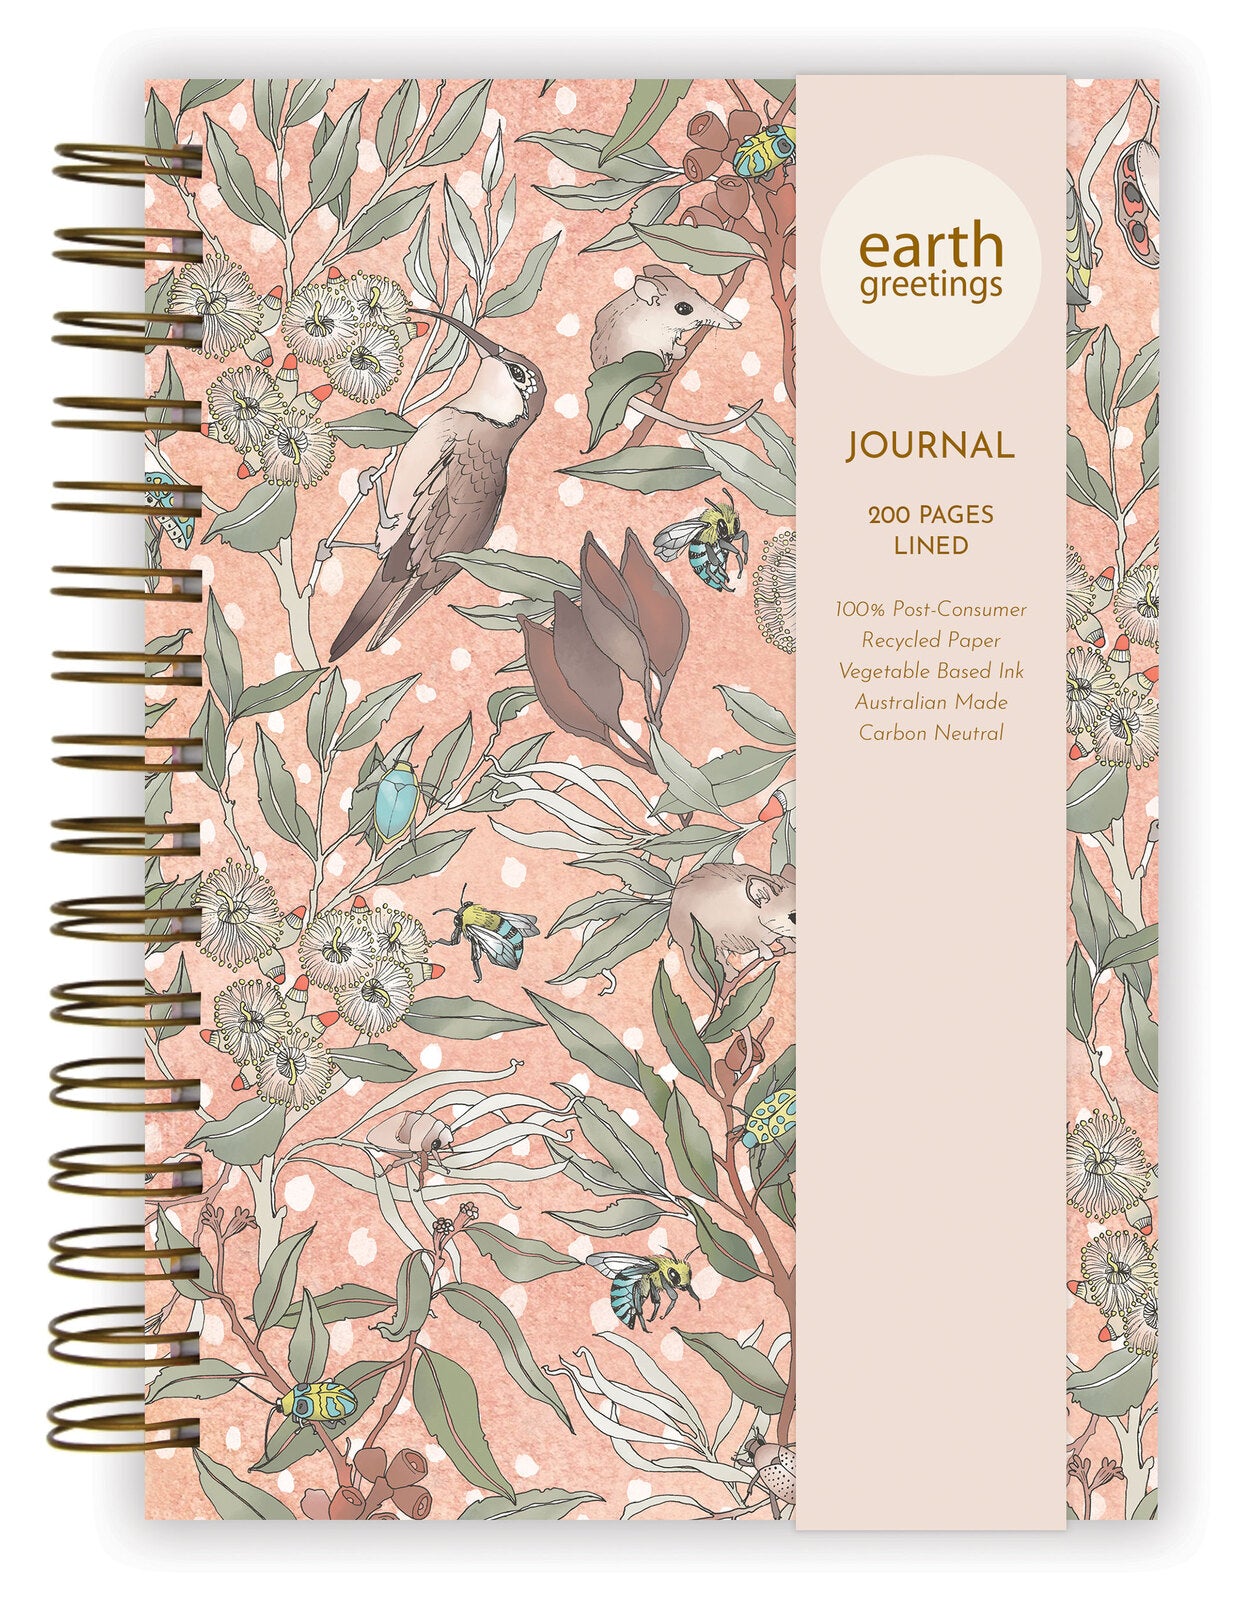 Earth Greetings Your Journal, 200 Lined Pages, Pollinators Design From The Victoria McGrane Collection